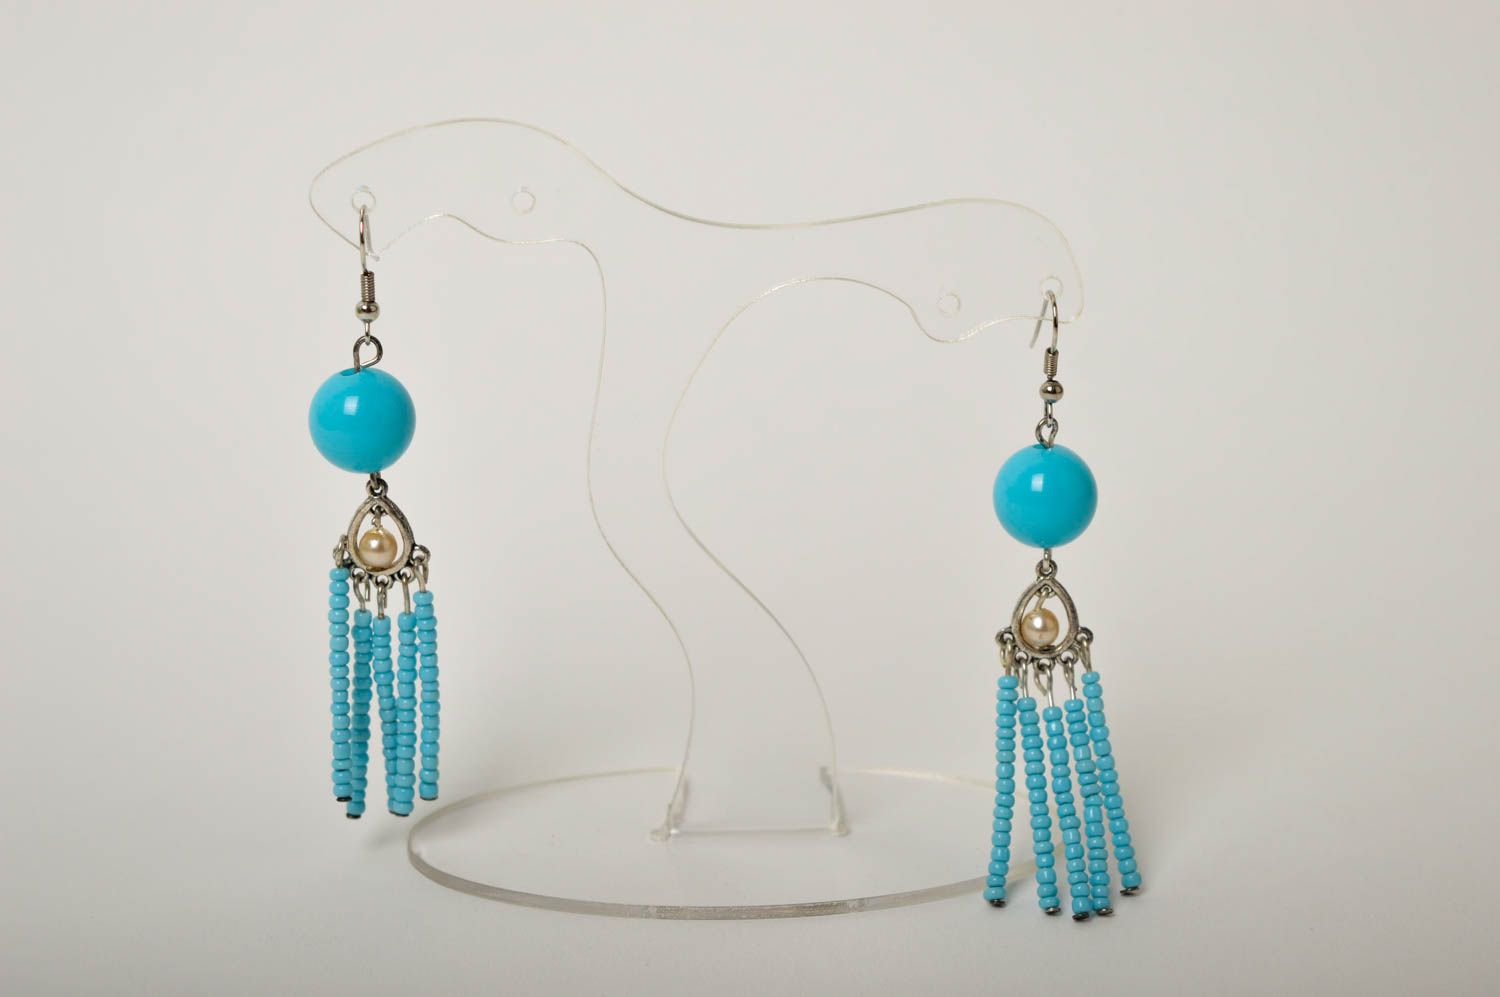 Handmade earrings long earrings with charms designer jewelry gift ideas photo 2